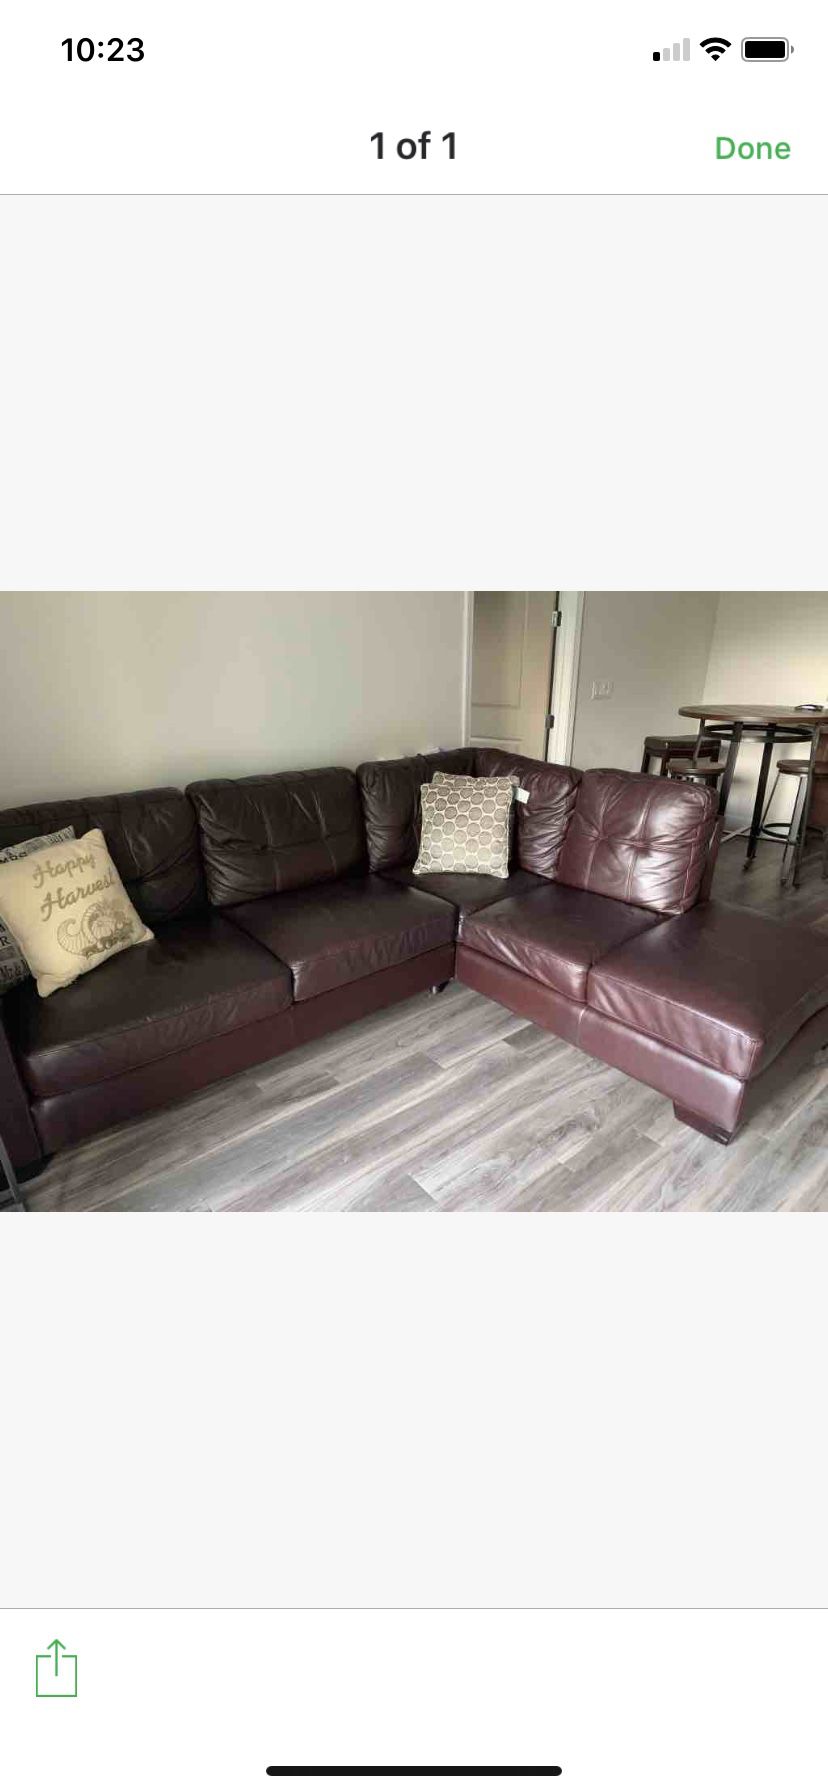 Sofa couch leather sectional